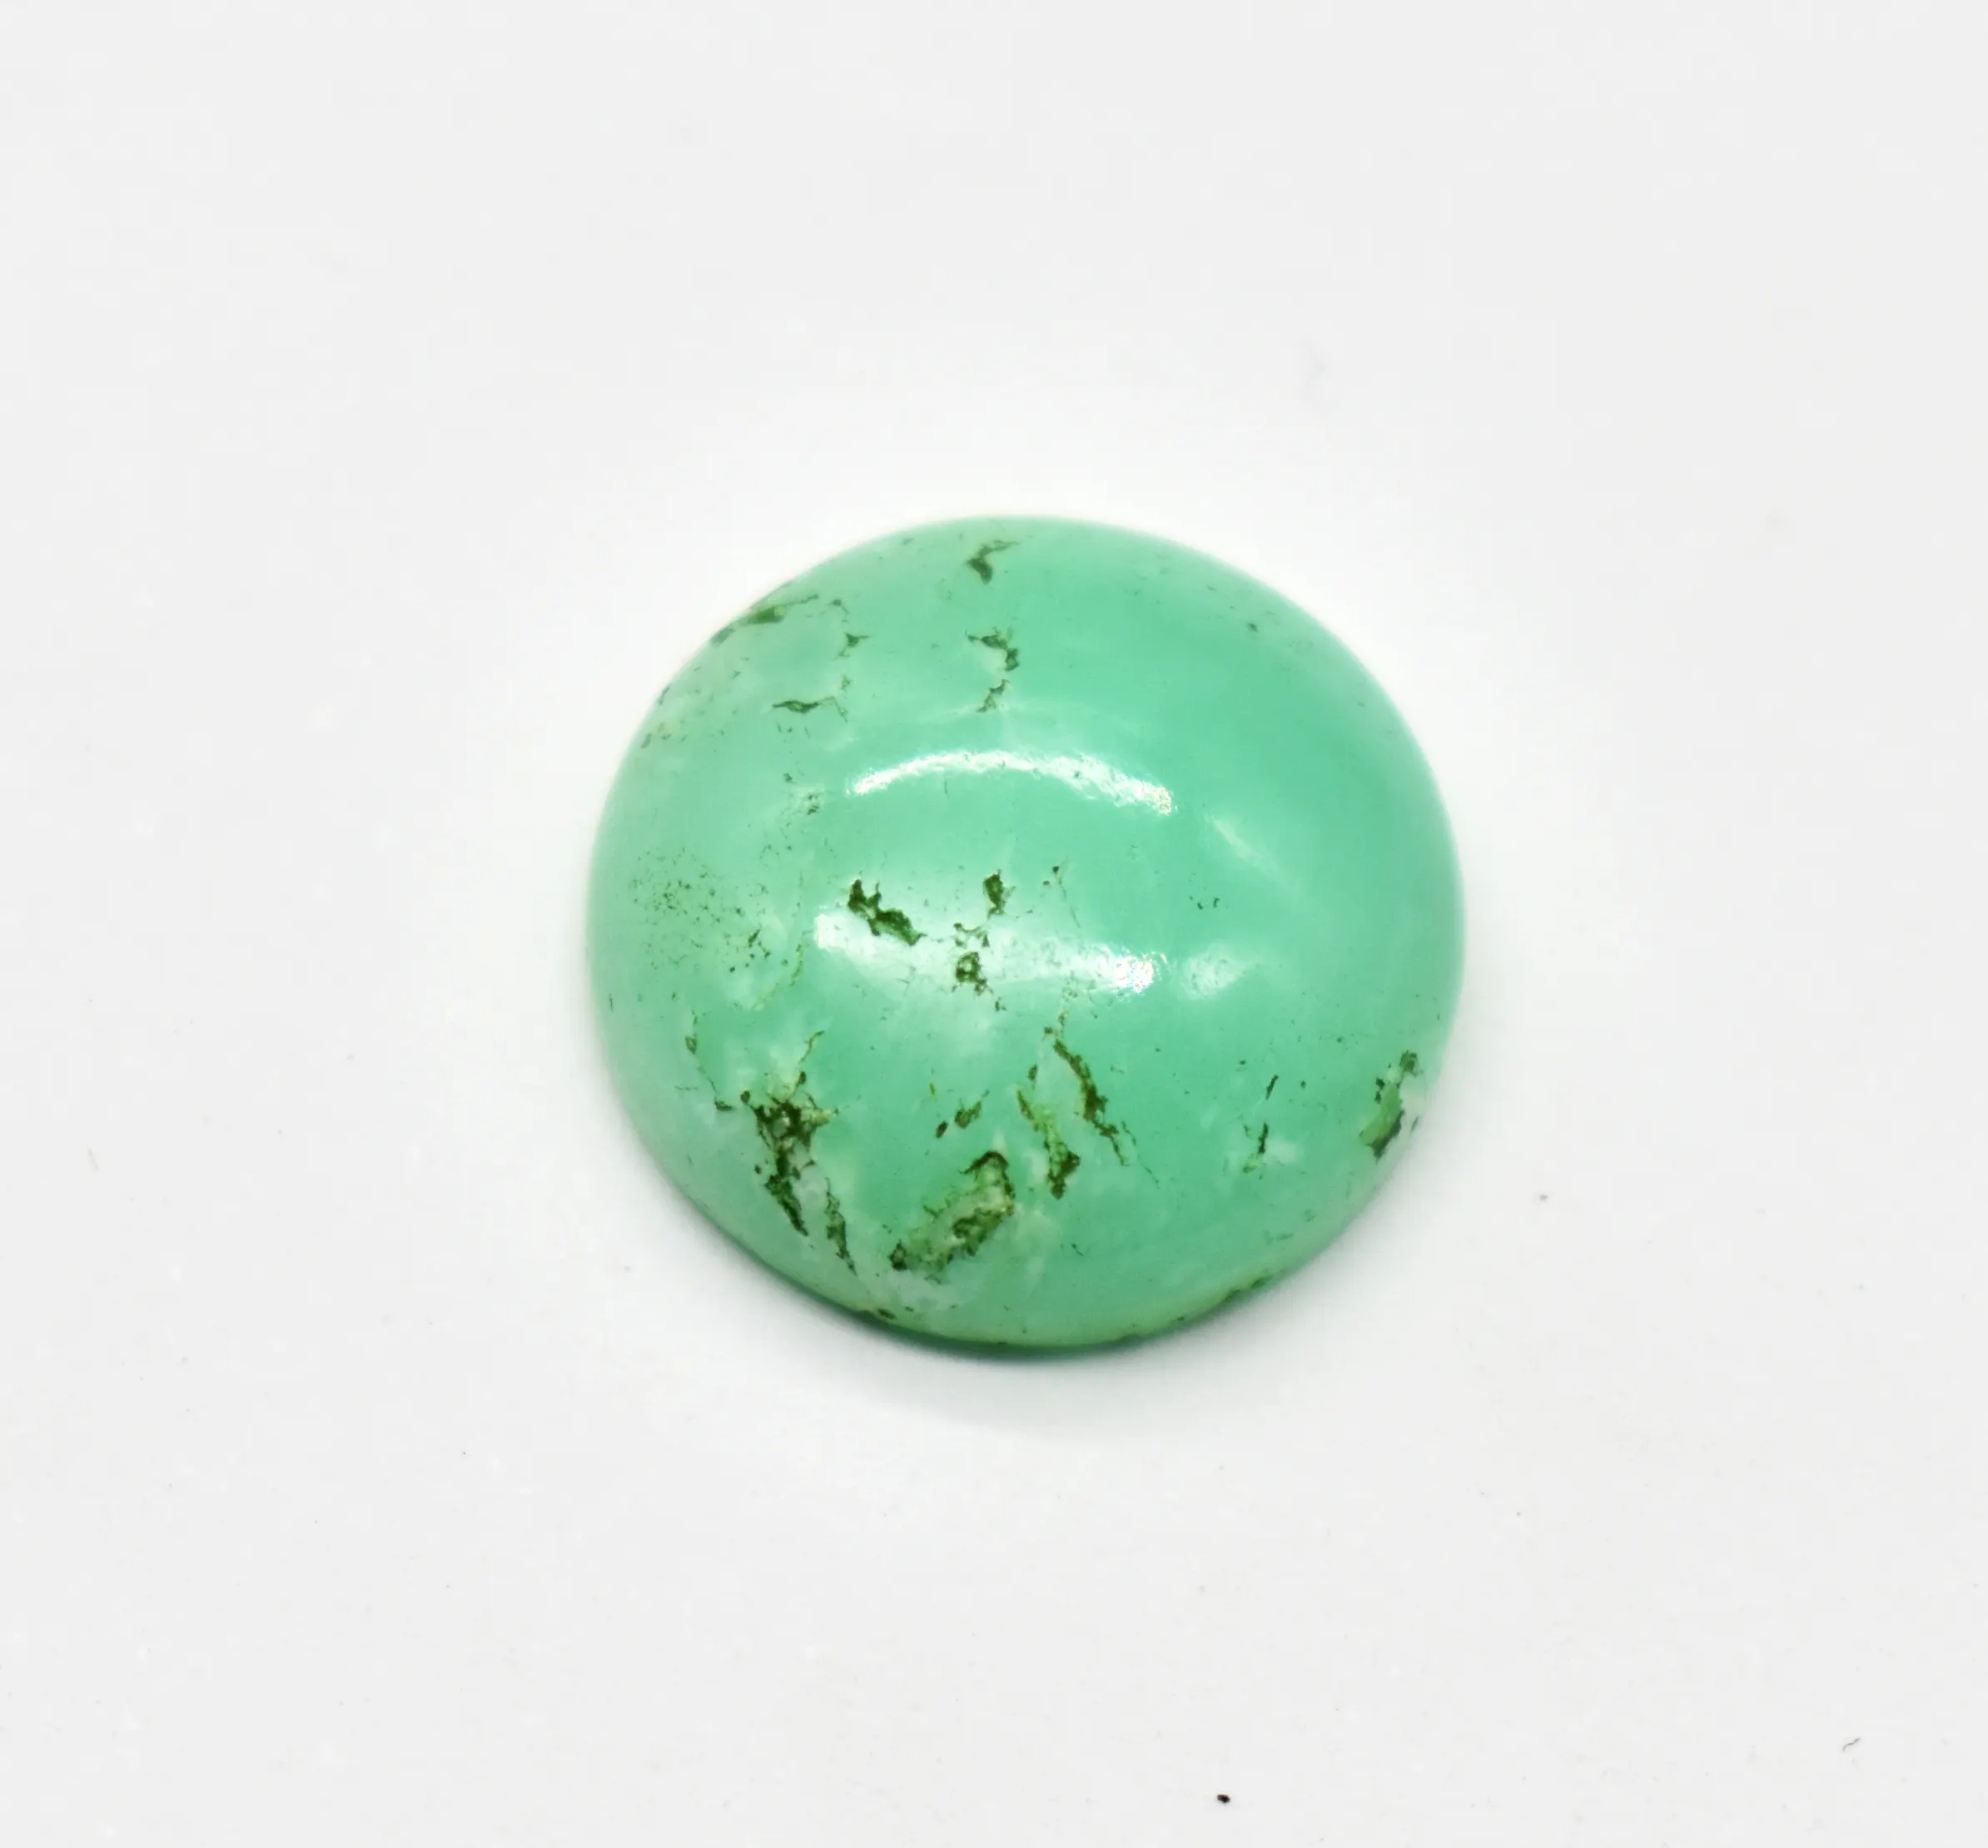 Natural Chrysoprase Rounds Calibrated Cabochons 15 MM Loose Gemstone Flat Back Cabochon For Jewelry Making.